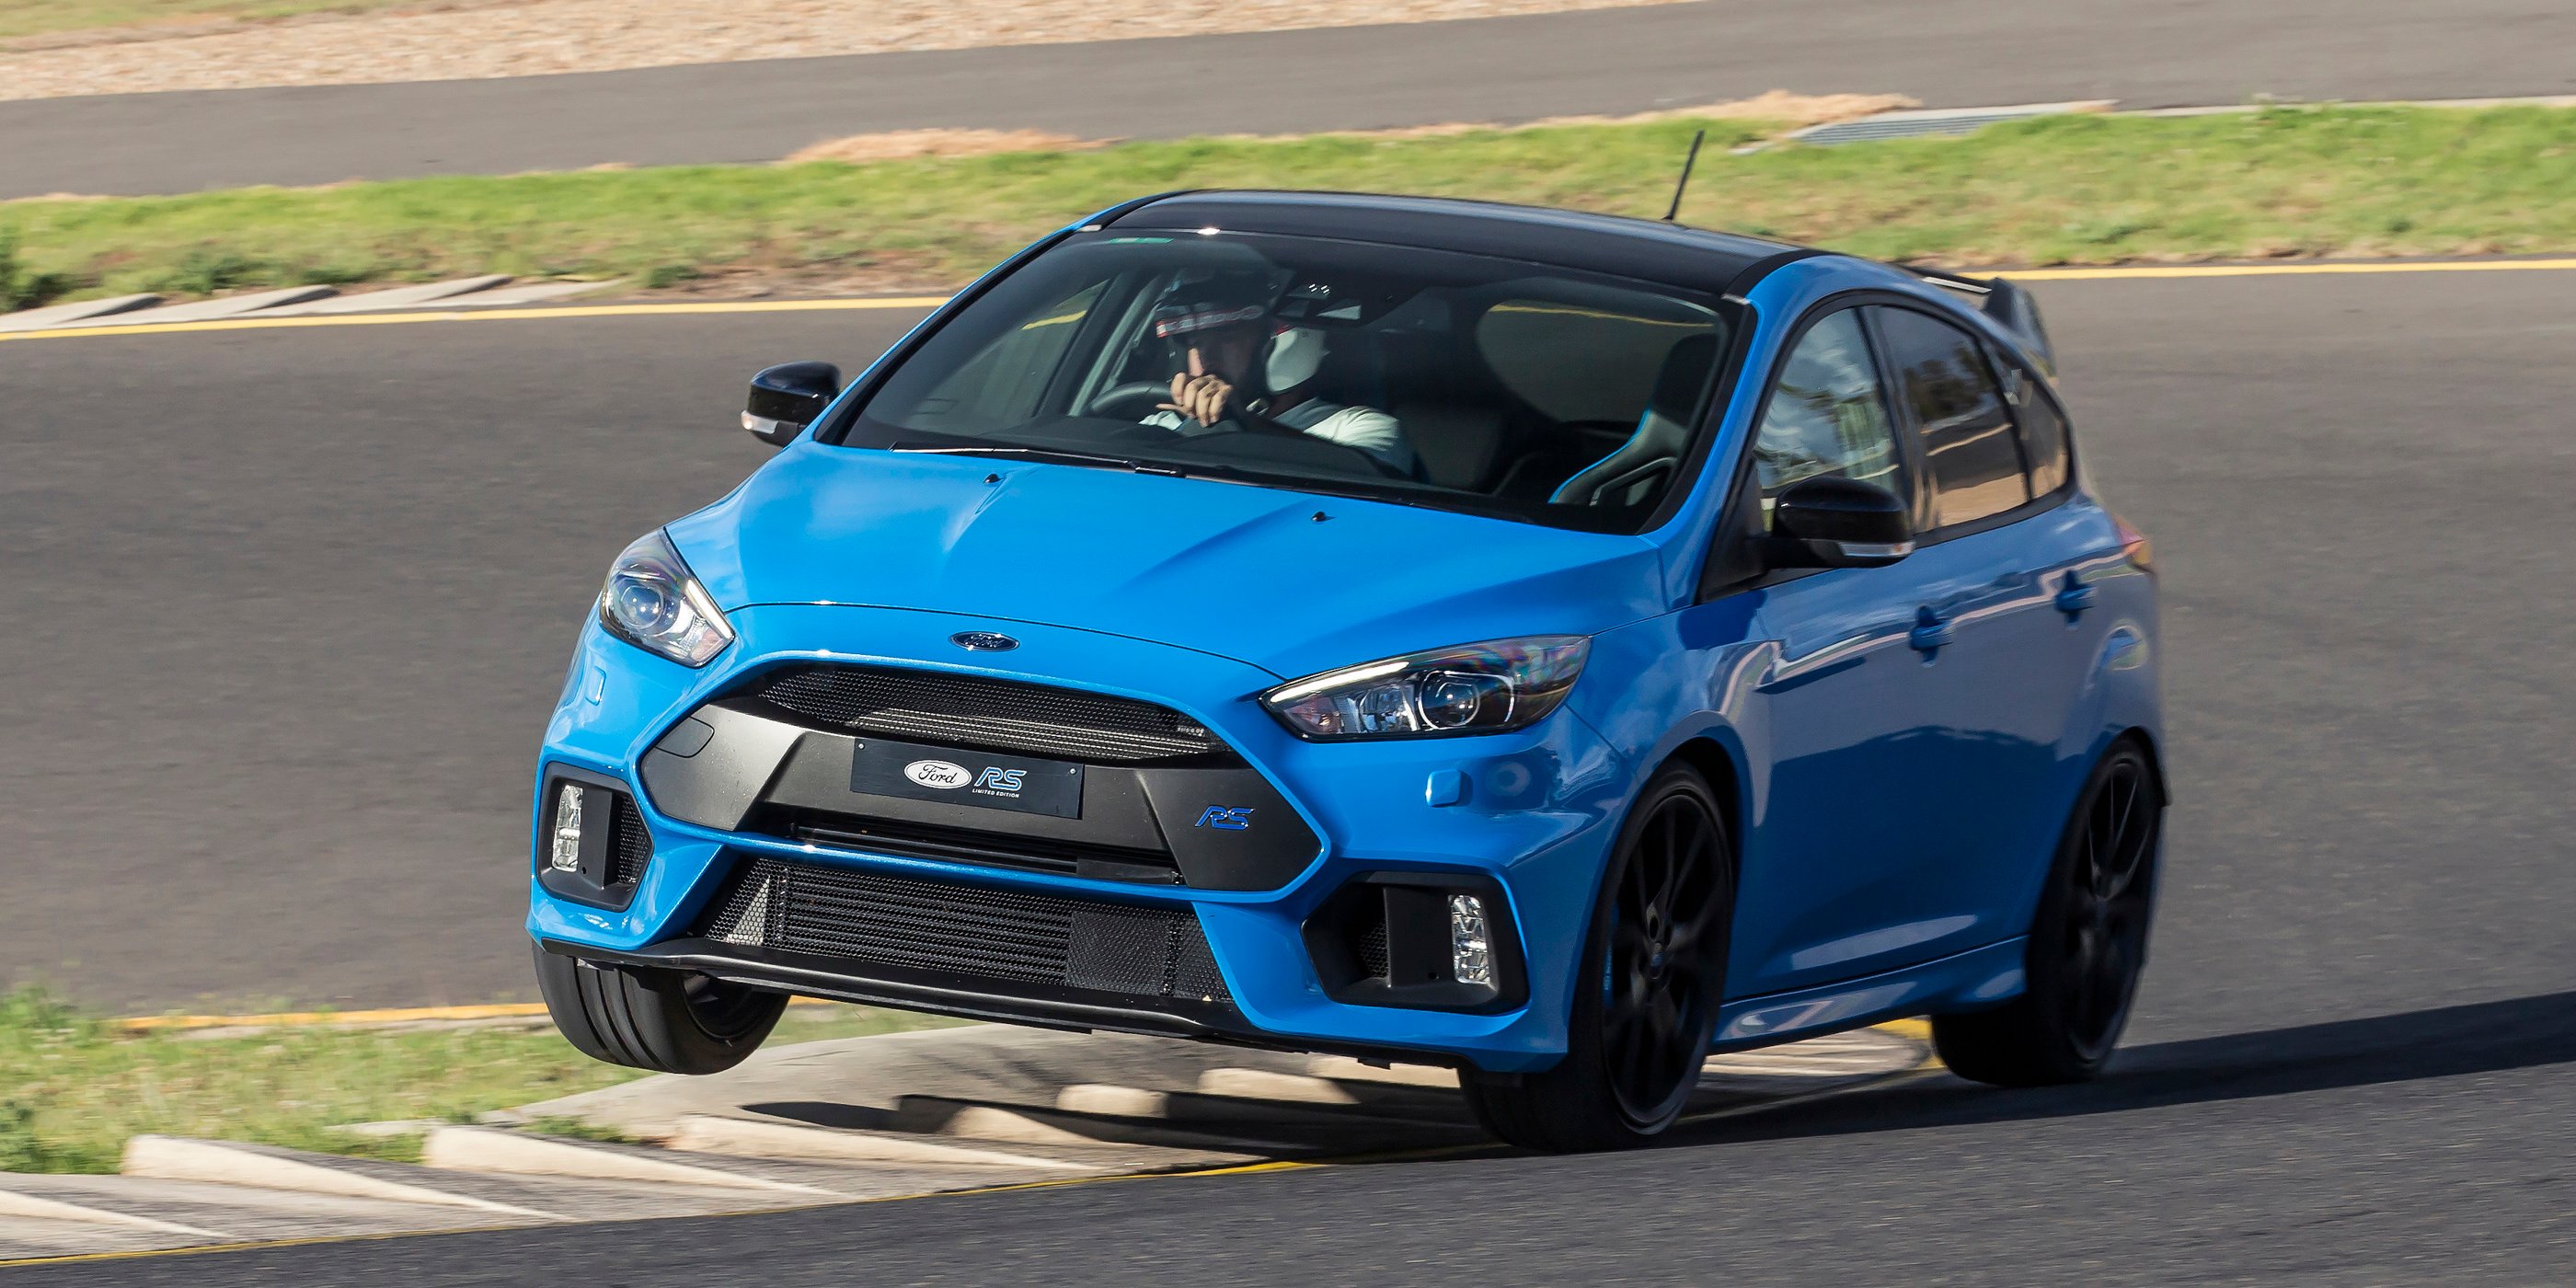 Video: 2018 Ford Focus RS Limited Edition road and track drive - Photos